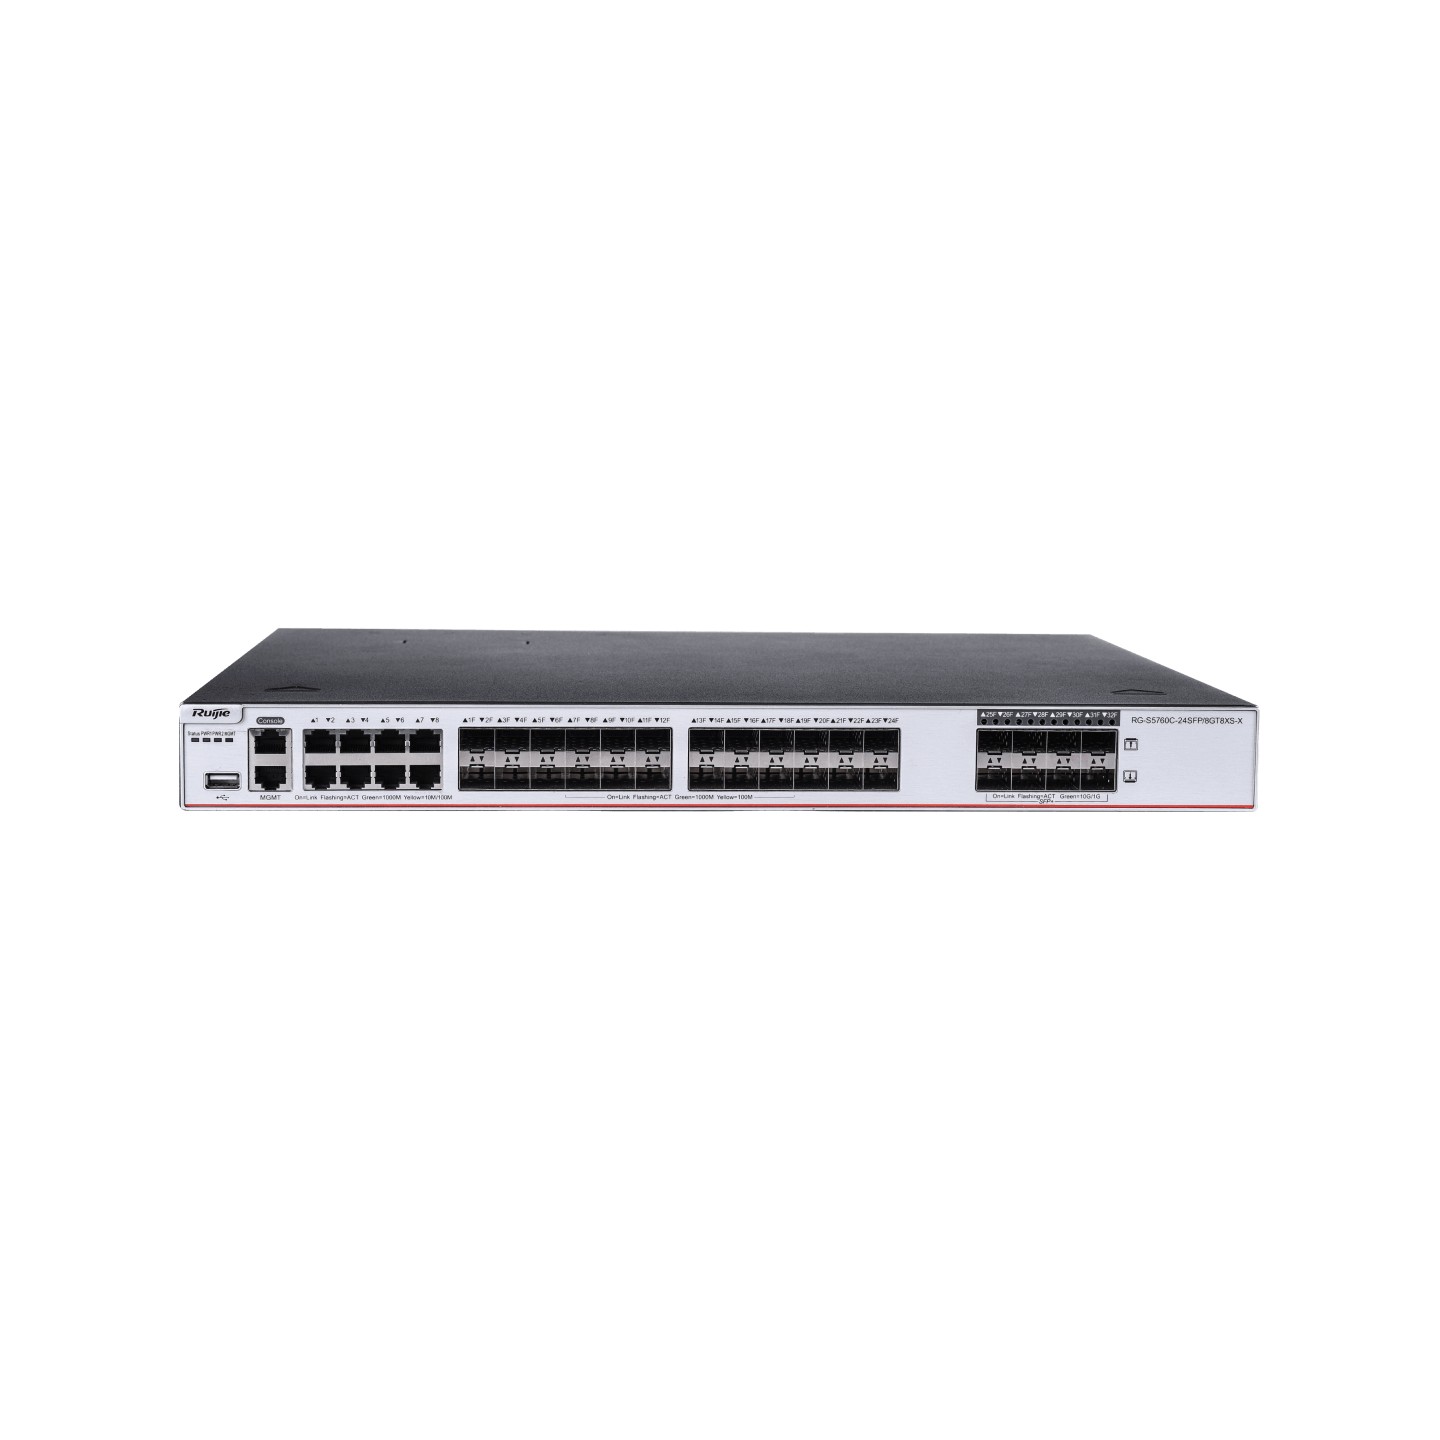 RG-S5760C-24SFP/8GT8XS-X 24-Port GE Optical Layer 3 Enterprise-Class Core or Aggregation Switch (with Eight Combo Ports), Eight 10G Uplink Ports